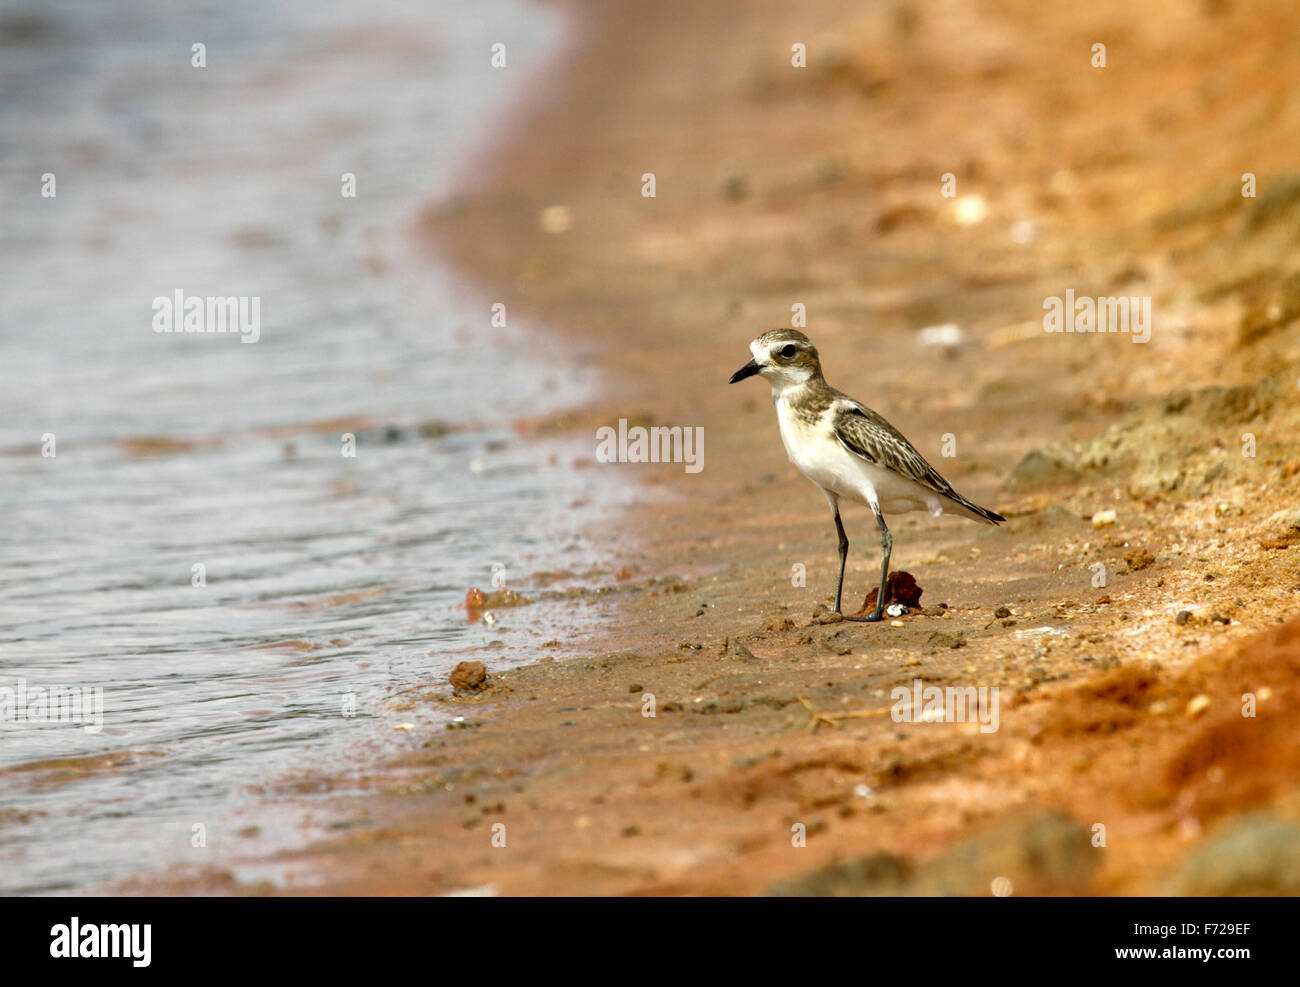 The sand plover (Charadrius mongolus) is a small wader in the plover family of birds. Stock Photo